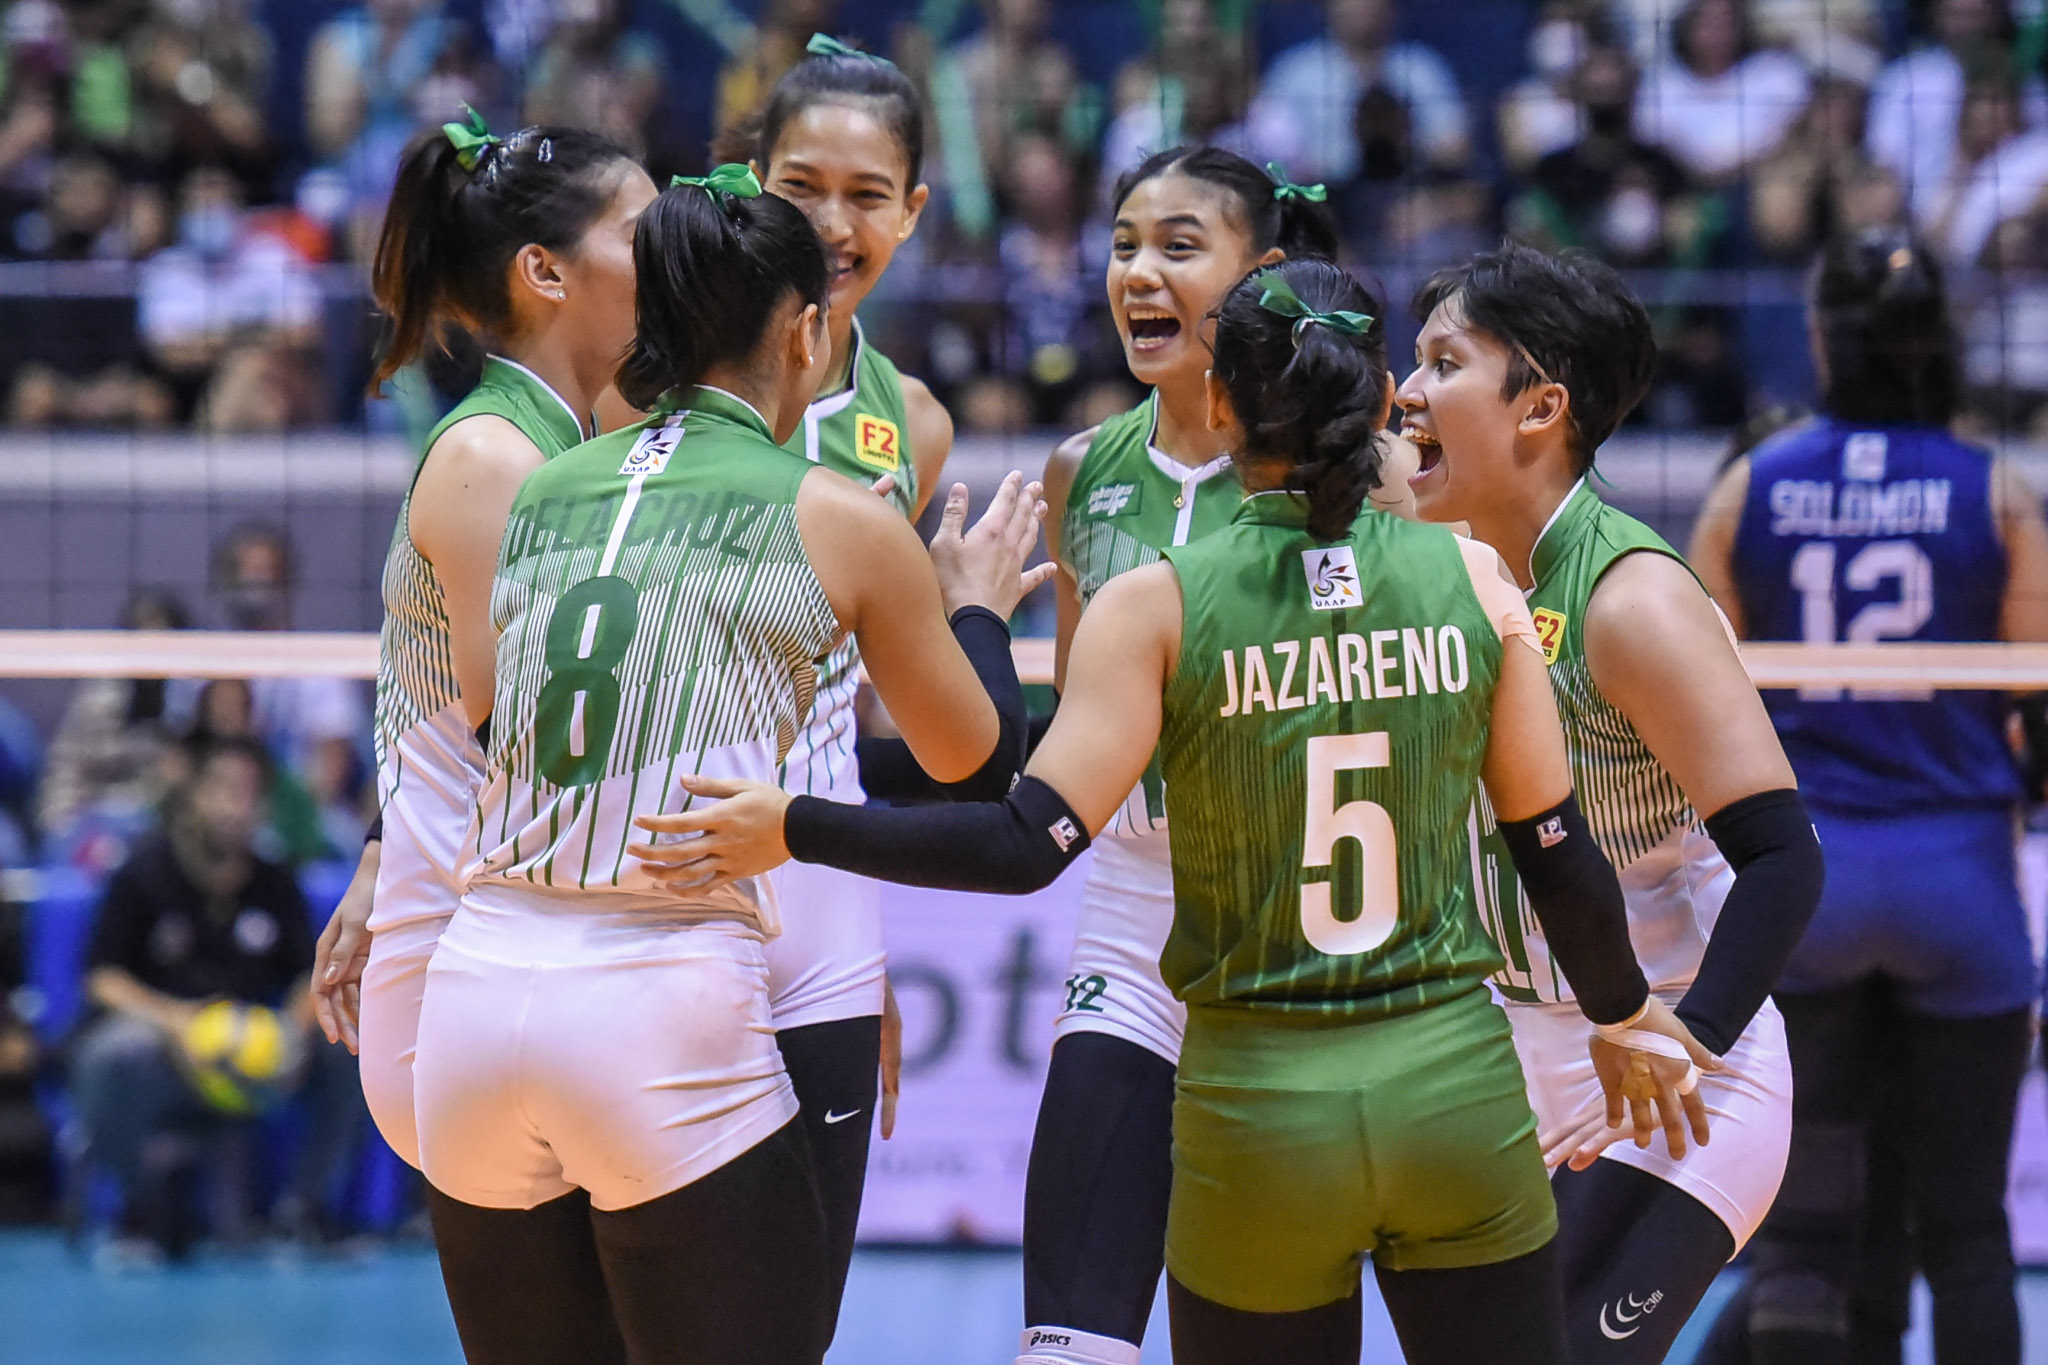 La Salle moves on cusp of UAAP women's volleyball title, NU